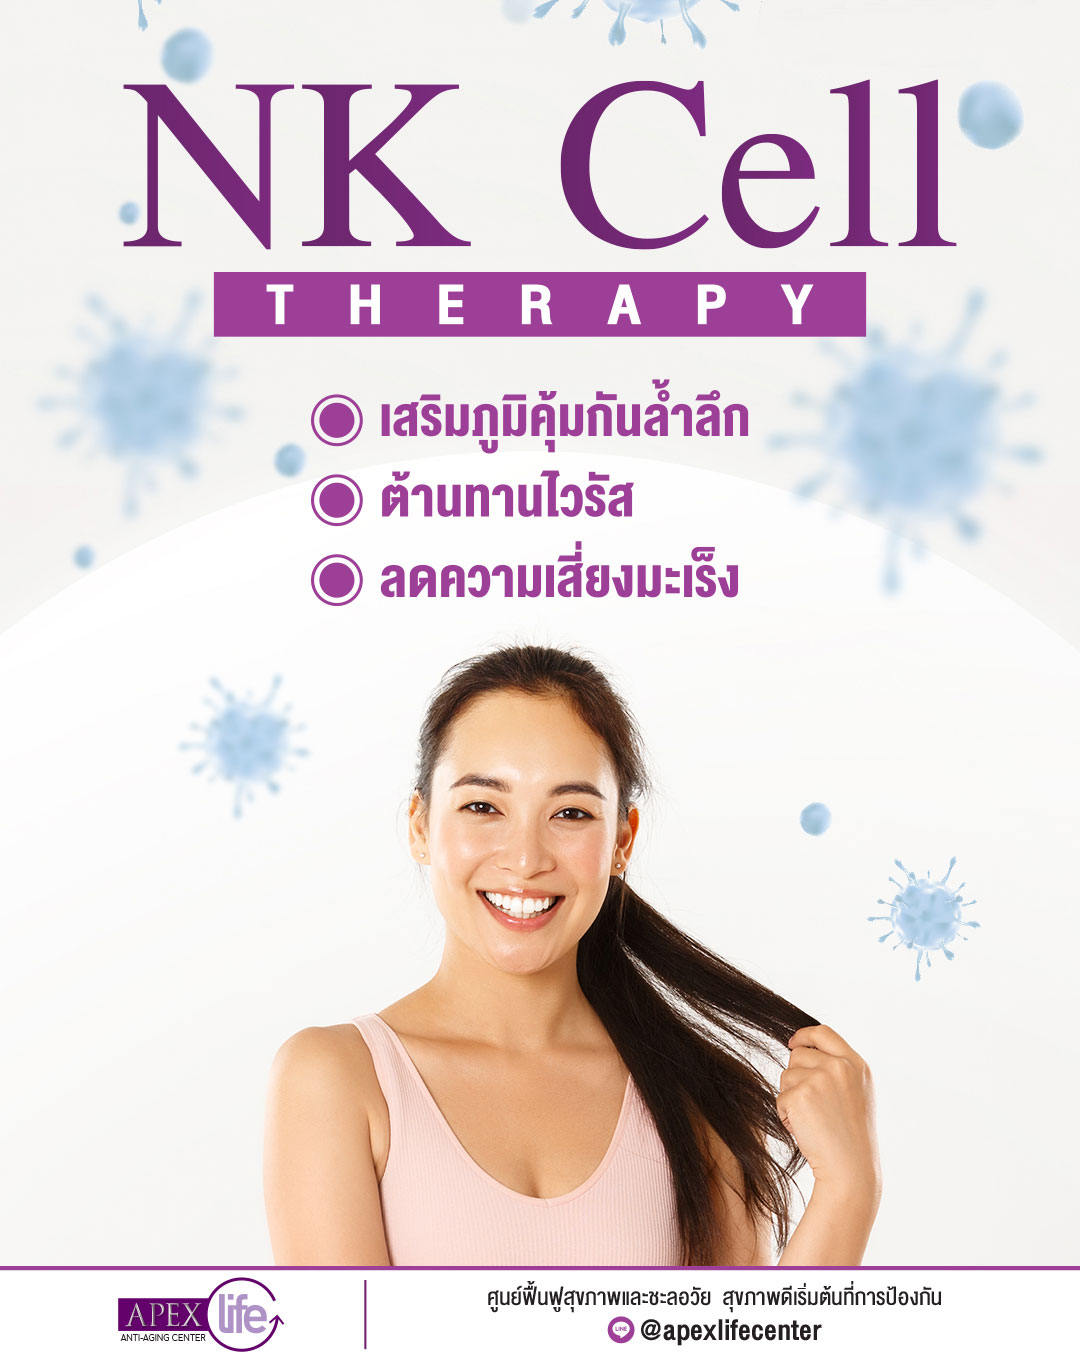 NK Cell